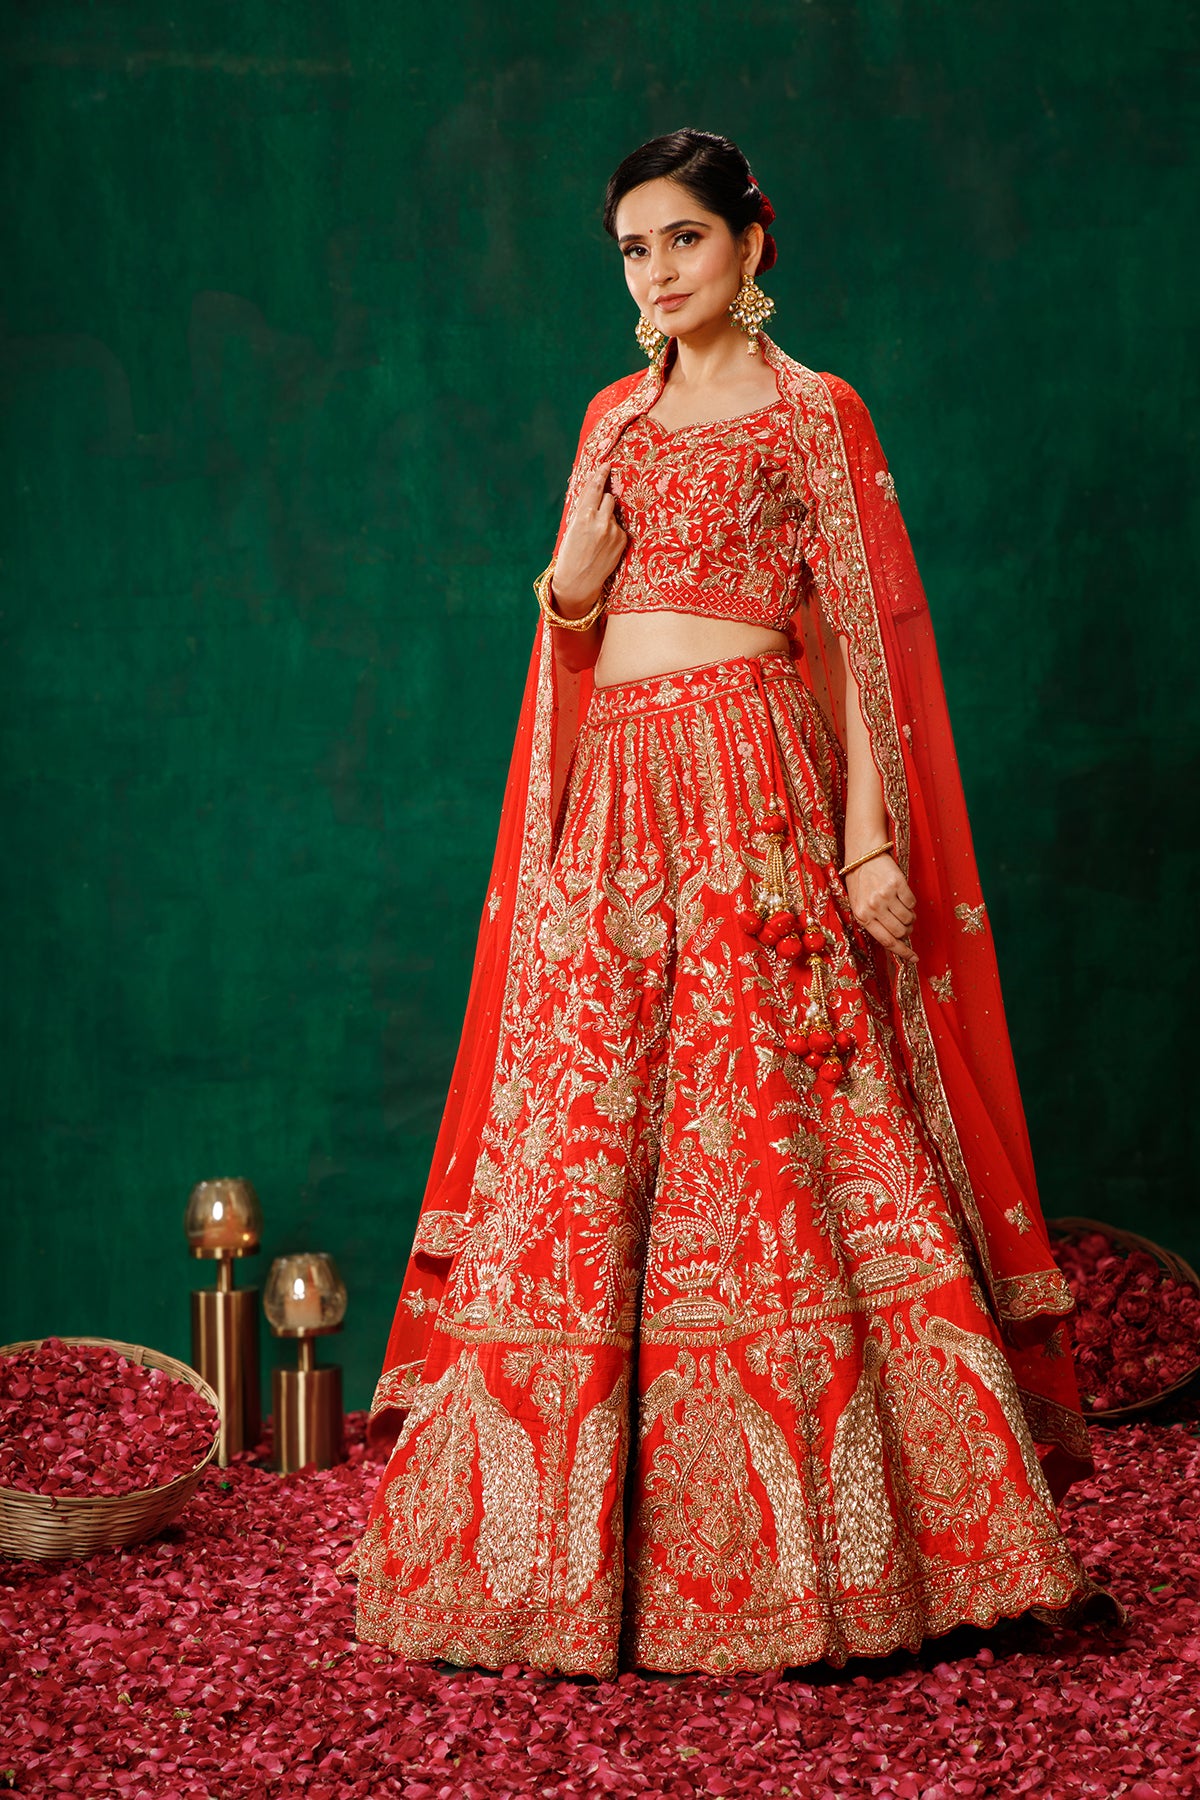 11 Indian Dulhan Images Featuring Blood Red and Black Outfits! | Red  wedding lehenga, Red and black outfits, Lehenga wedding